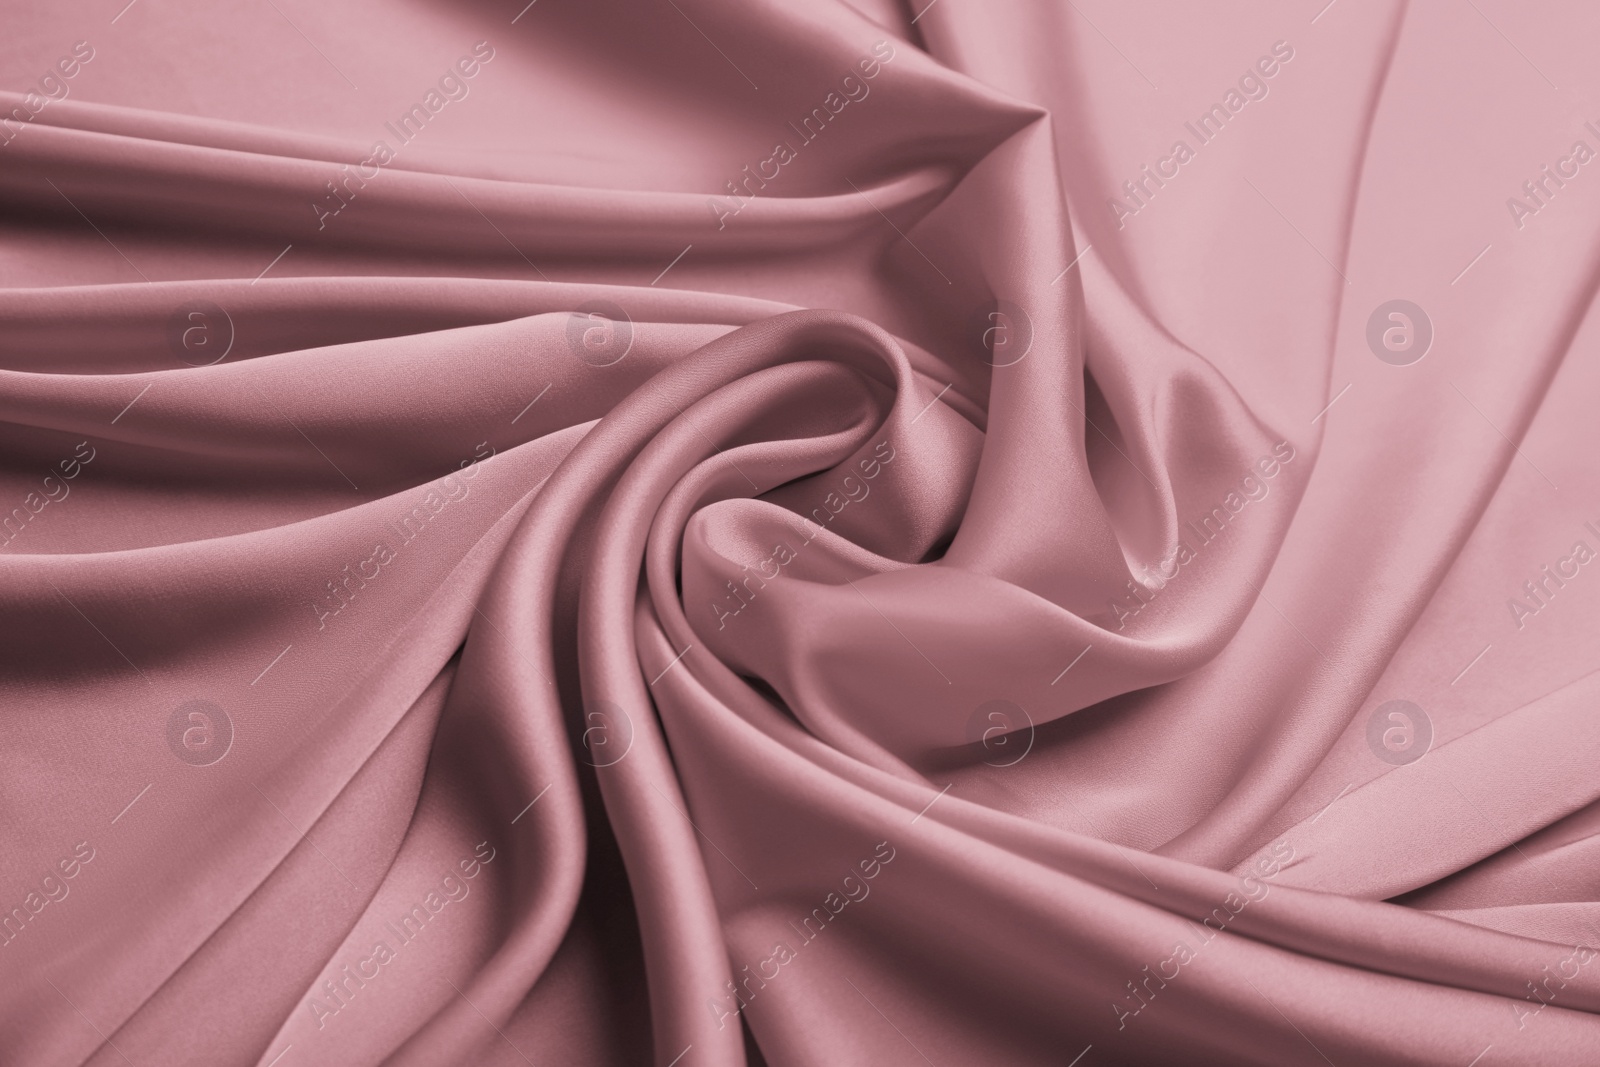 Image of Delicate pink silk fabric as background, closeup view